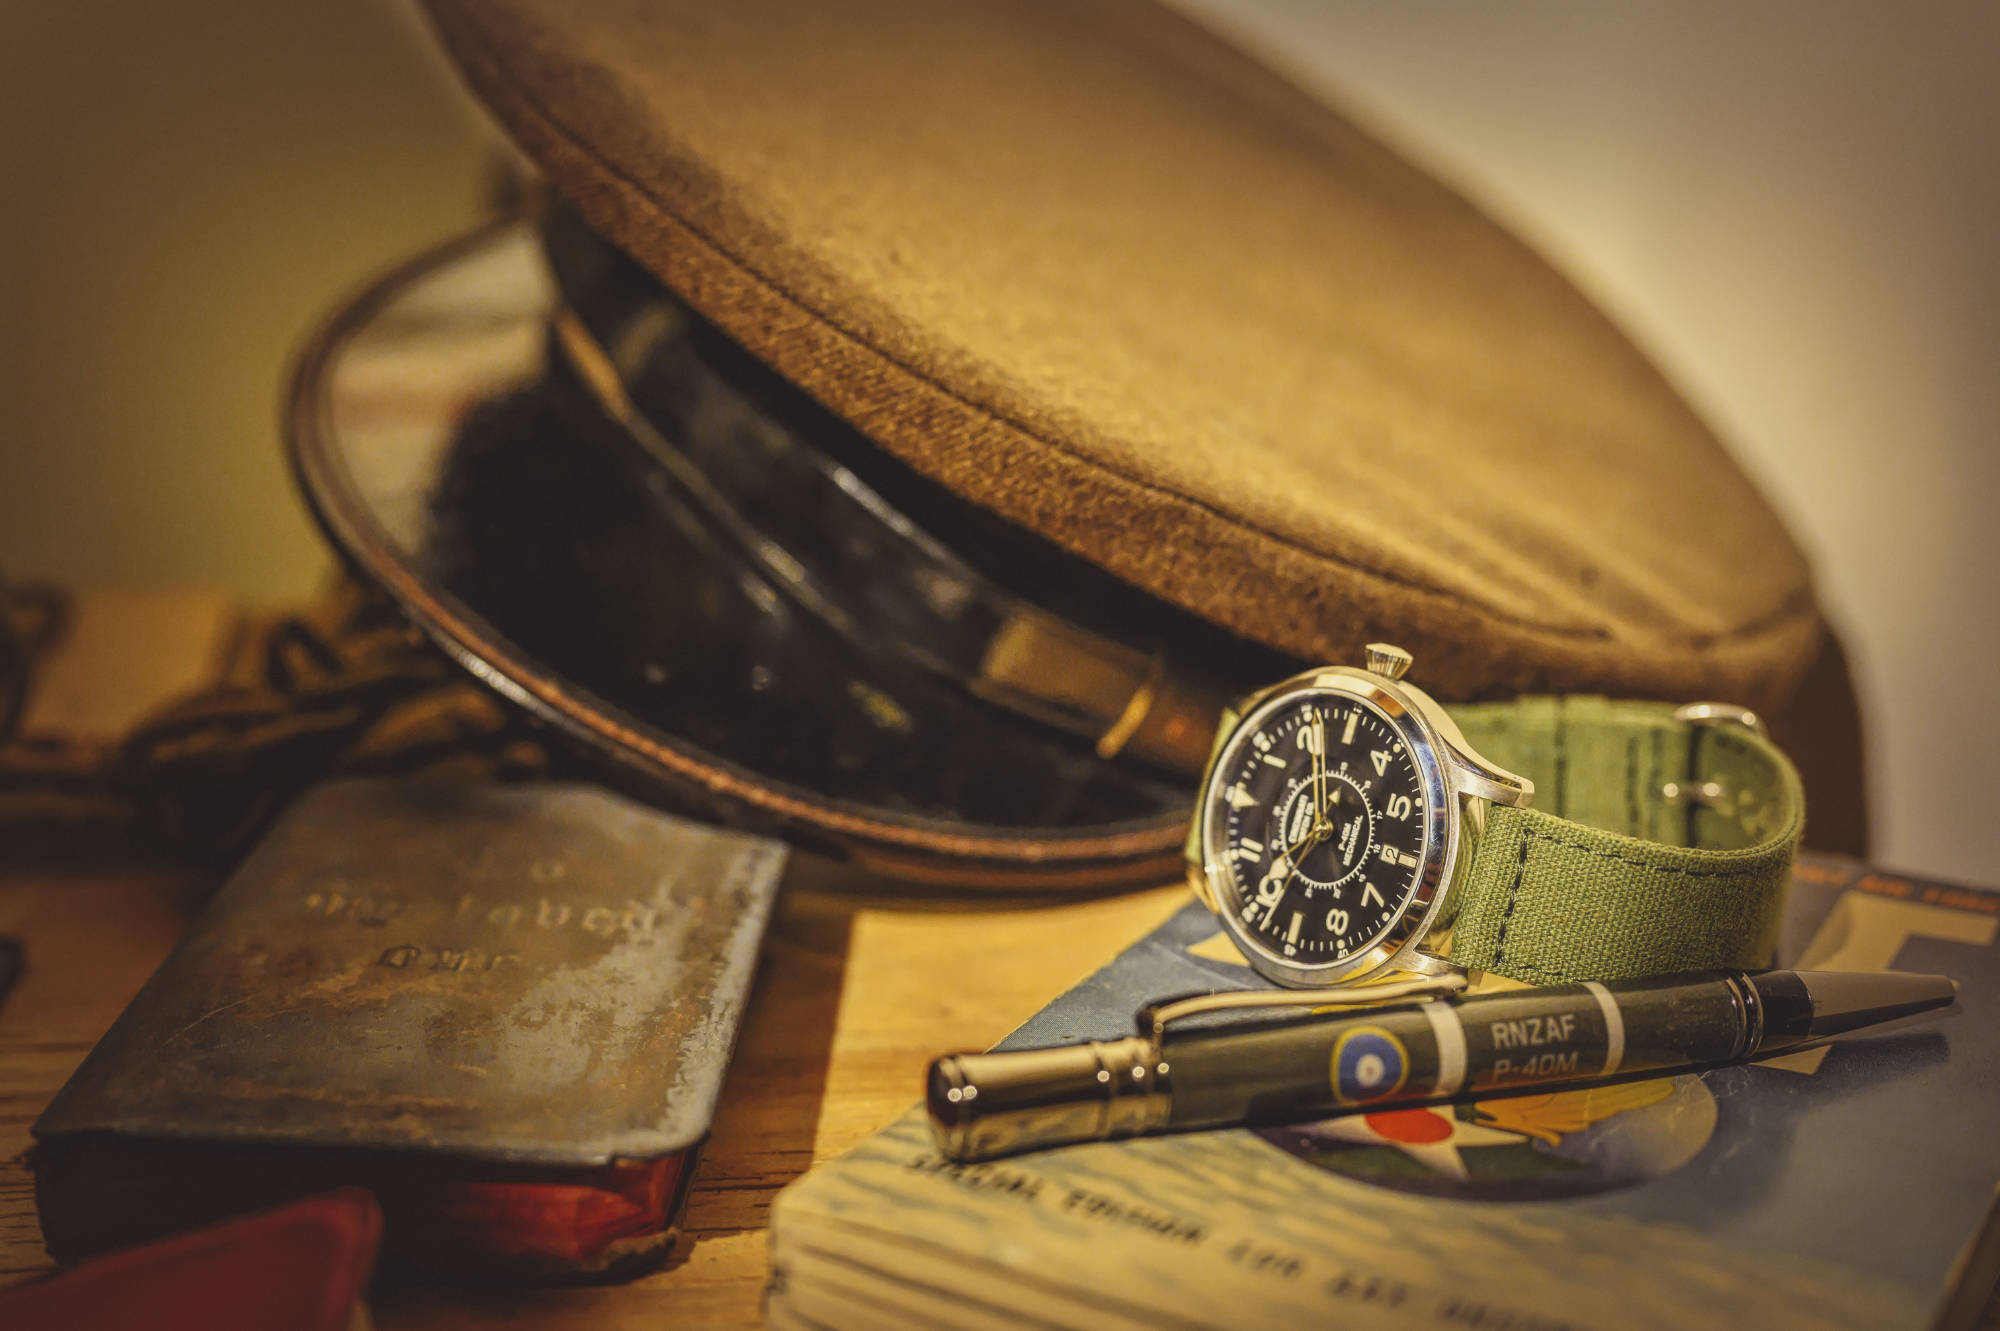 The P-40M Mechanical pilot watch by Build Your Own Watch